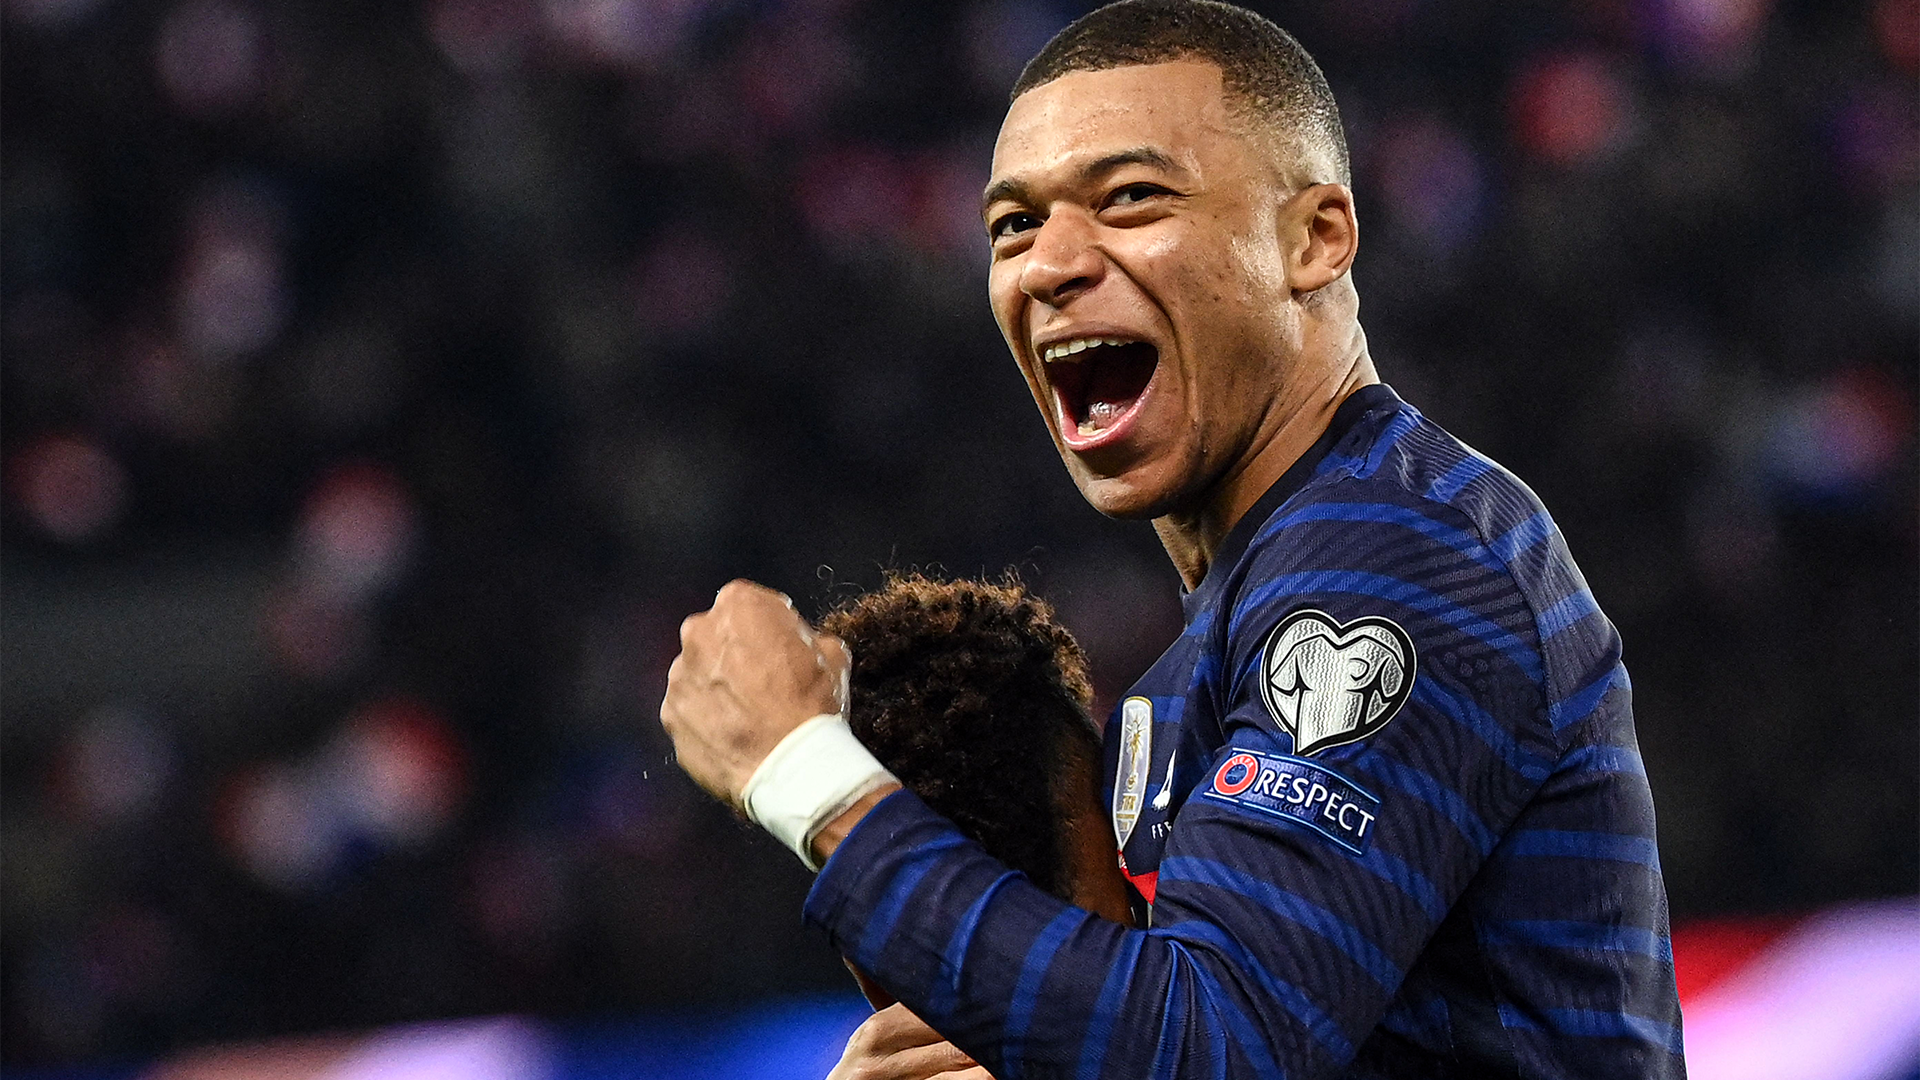 Mbappe's photoshoot protest leads French Federation to promise changes |  Goal.com US